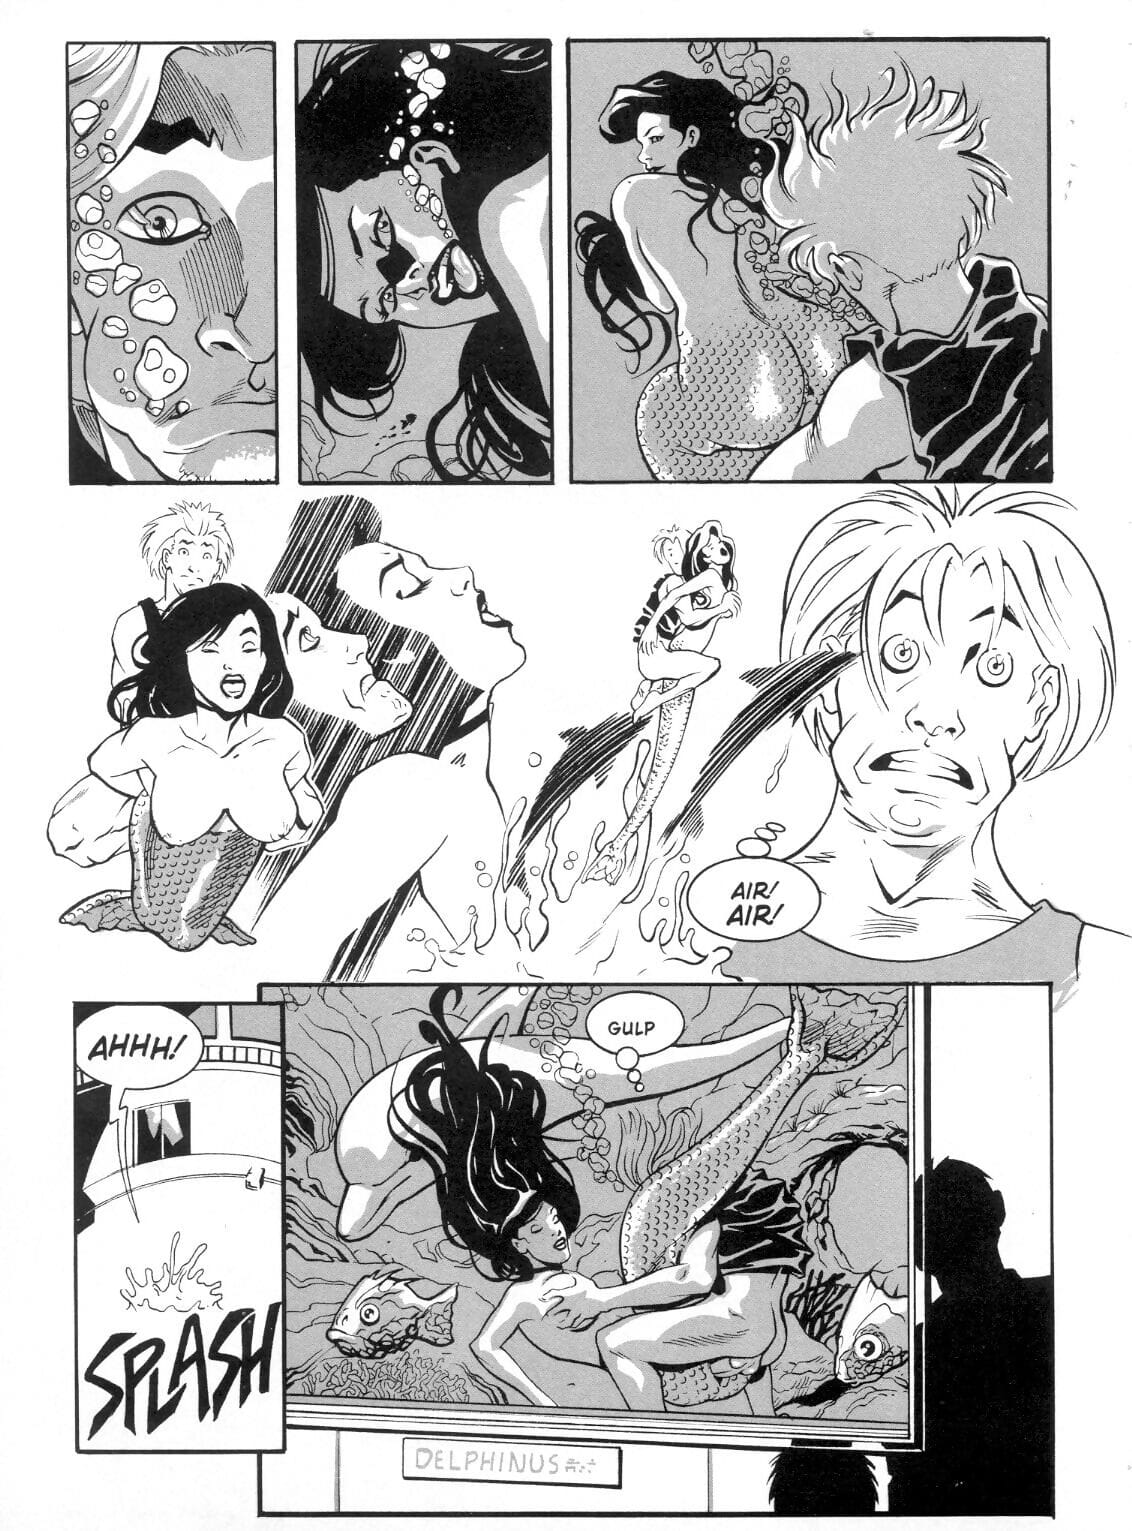 French Kiss 4 - part 2 page 1